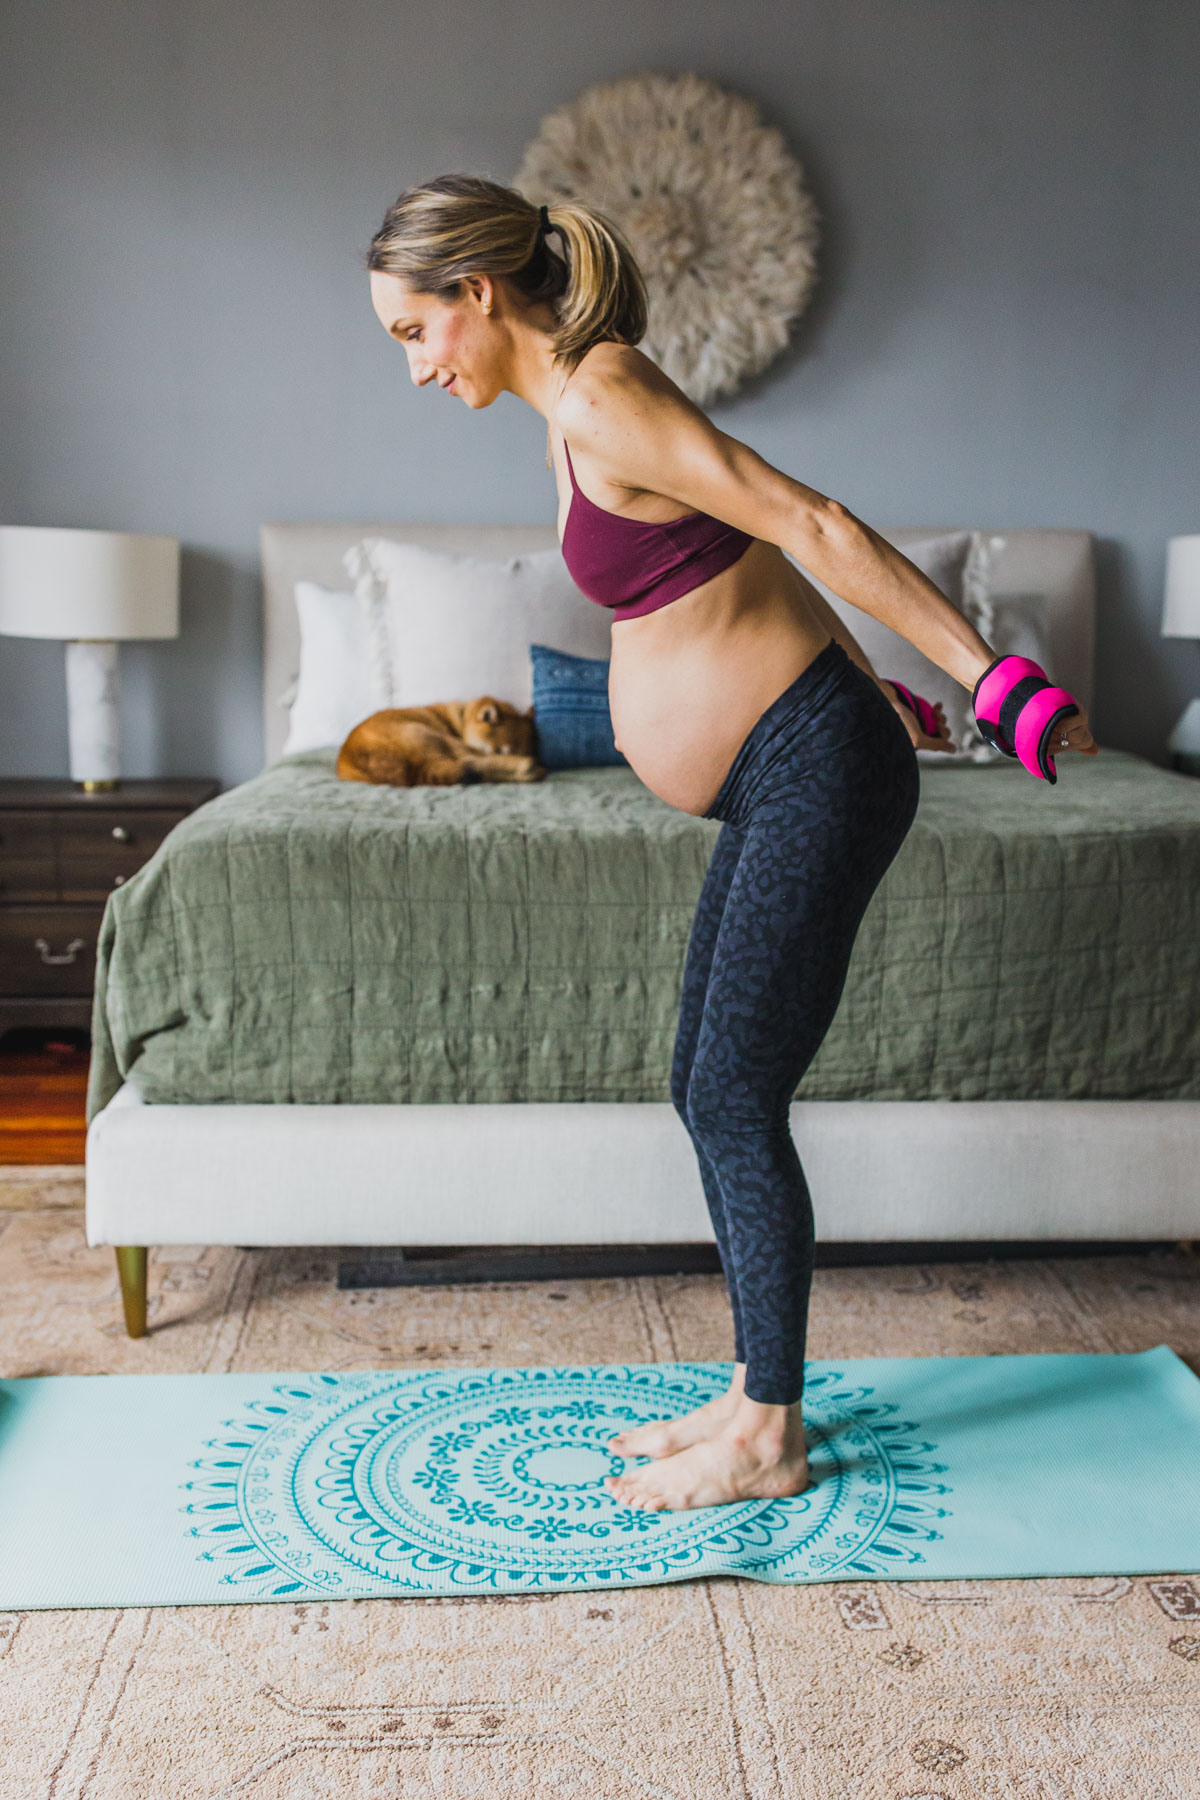 Looking for a 3rd trimester pregnancy workout? I'm sharing my favorite quick workouts at home. These little or no equipment full body workouts are so easy to do in your living room, even with a toddler running around and will help you have a fit pregnancy. Click through for my favorite at home workouts for women and more healthy living motivation. #healthyliving #pregnancyworkout #fitpregnancy